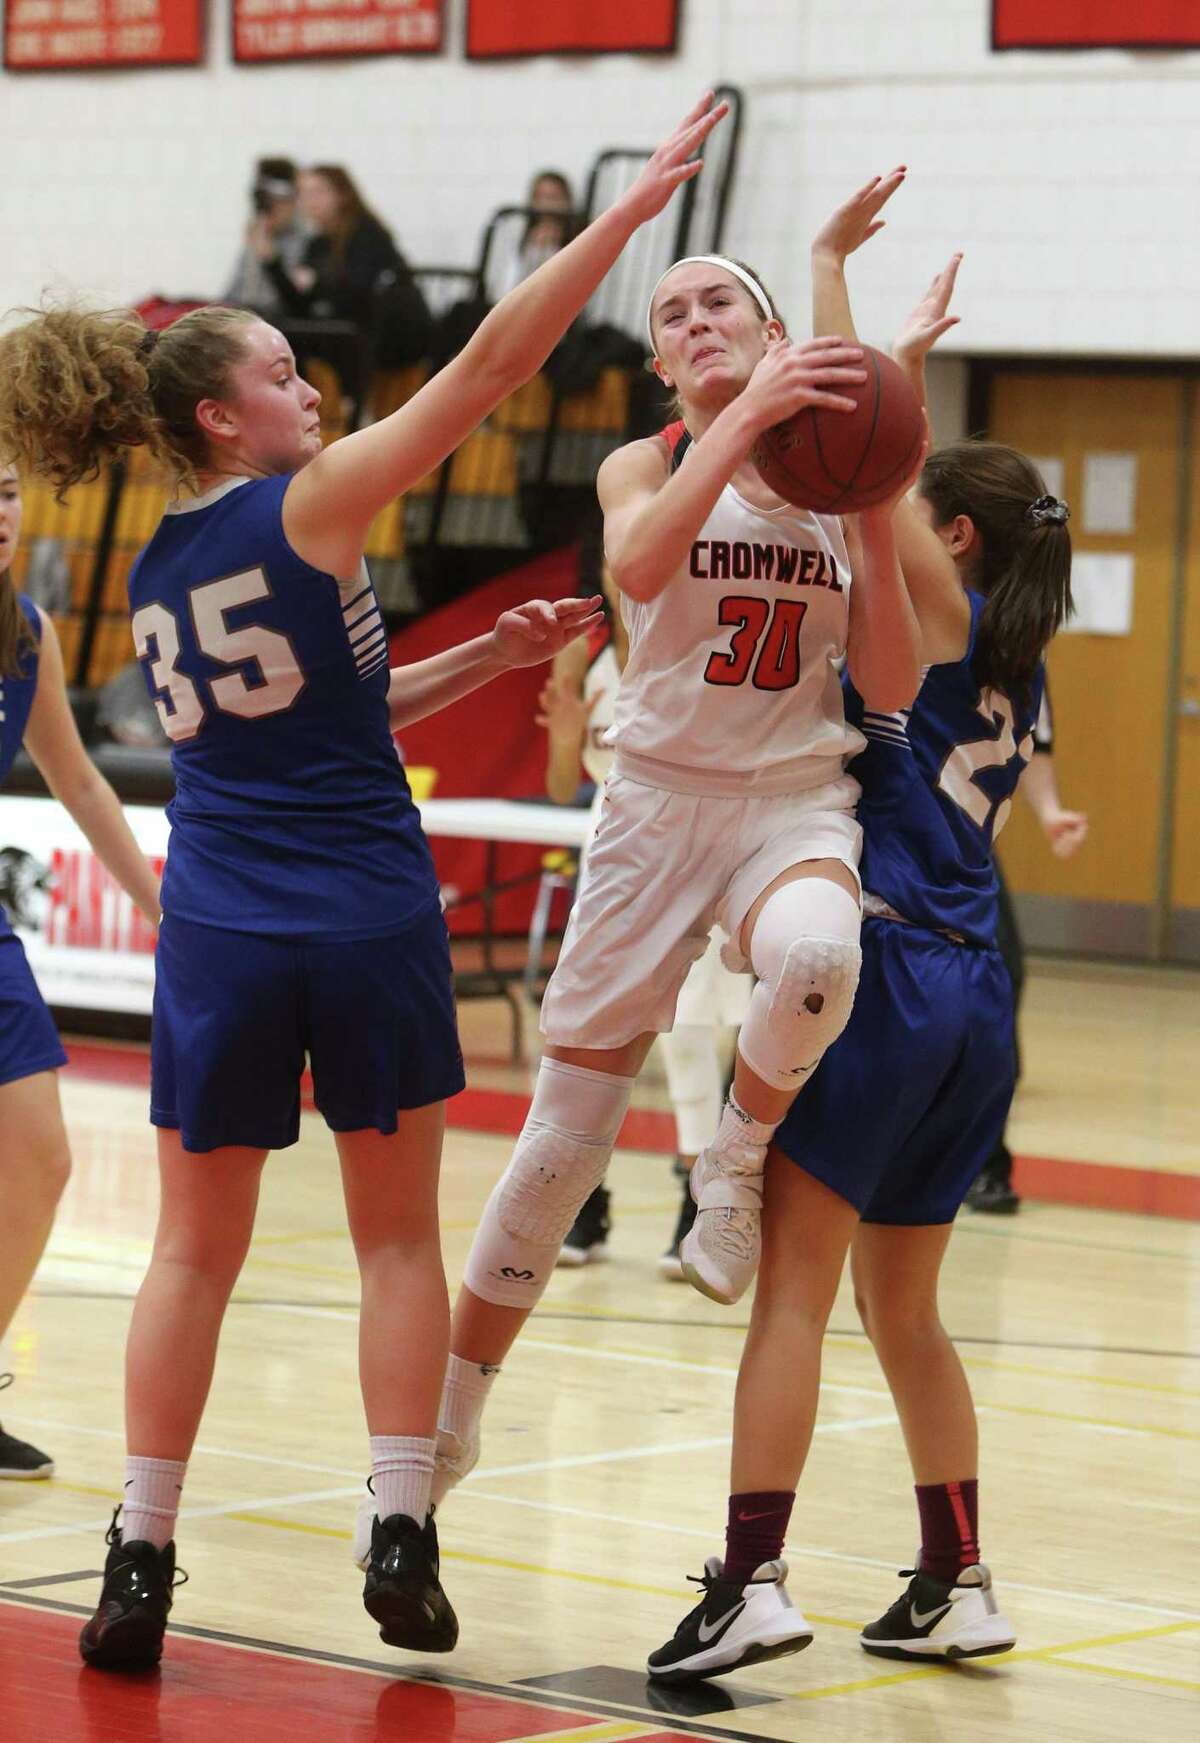 Cromwell High School’s Vanessa Stolstajner goes up for a shot over Old Lyme High School’s Emma McCulloch and Catherine Battalino during the girls varsity basketball game in Cromwell on Tuesday, Feb. 19.